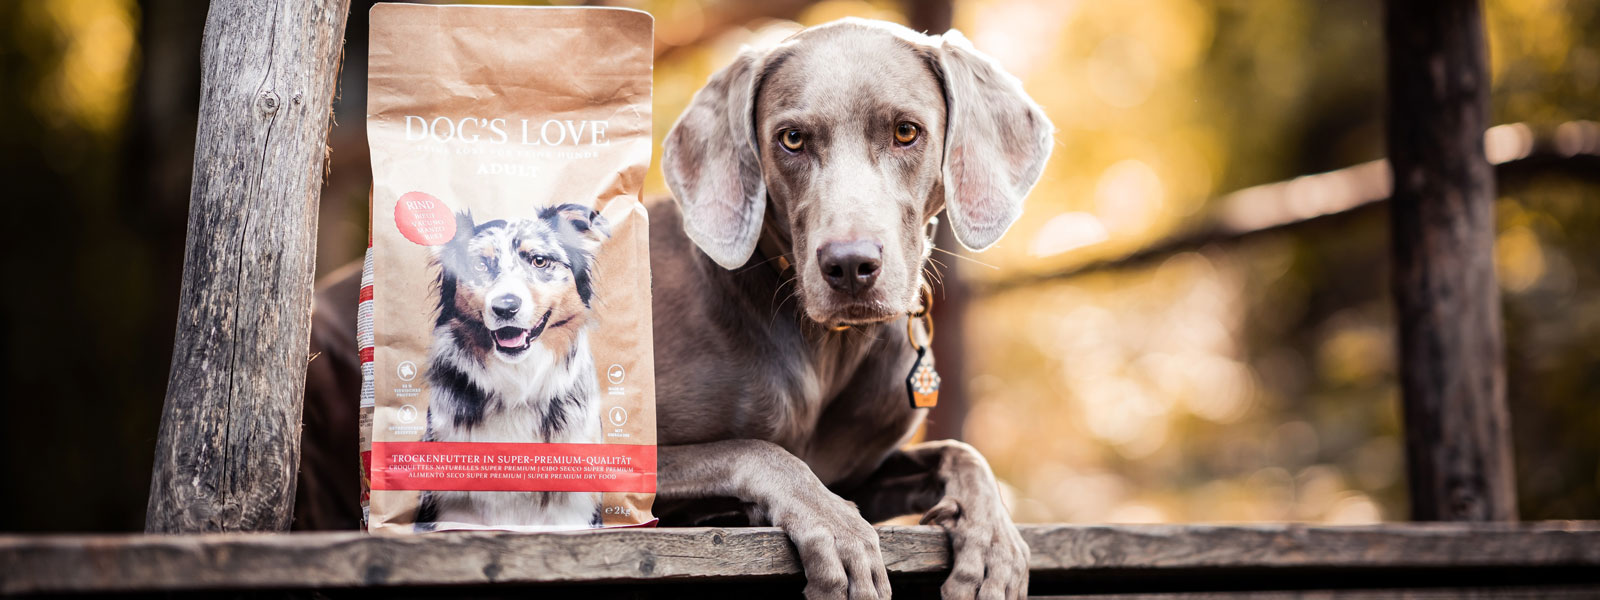 dog beside a package of DOGS LOVE dry dog food